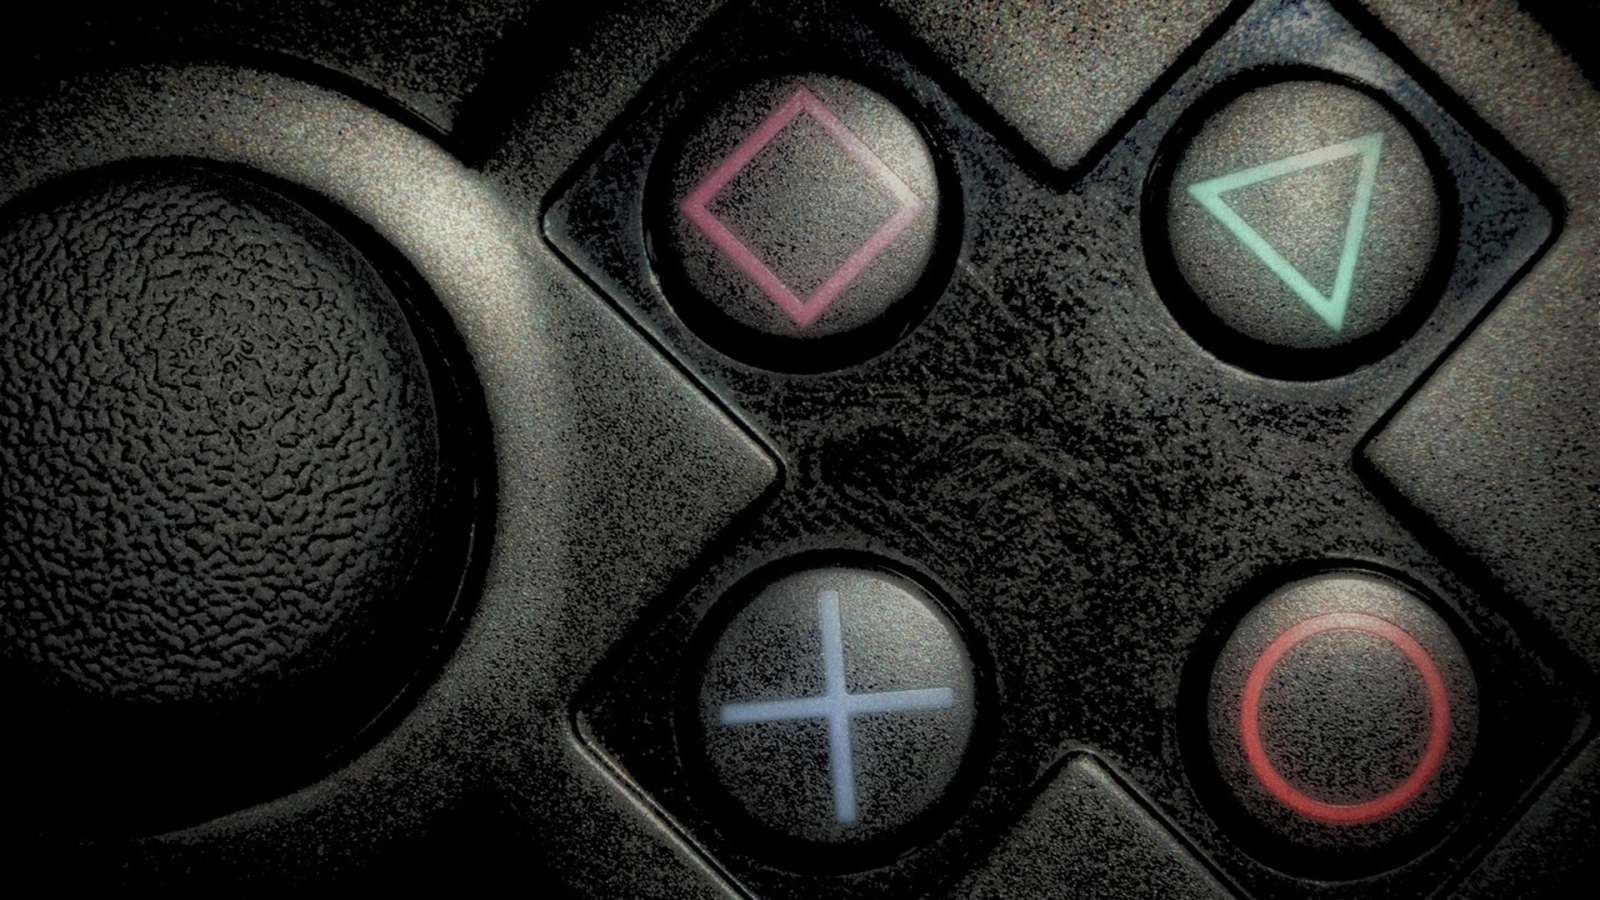 Playstation Buttons for 1600 x 900 HDTV resolution